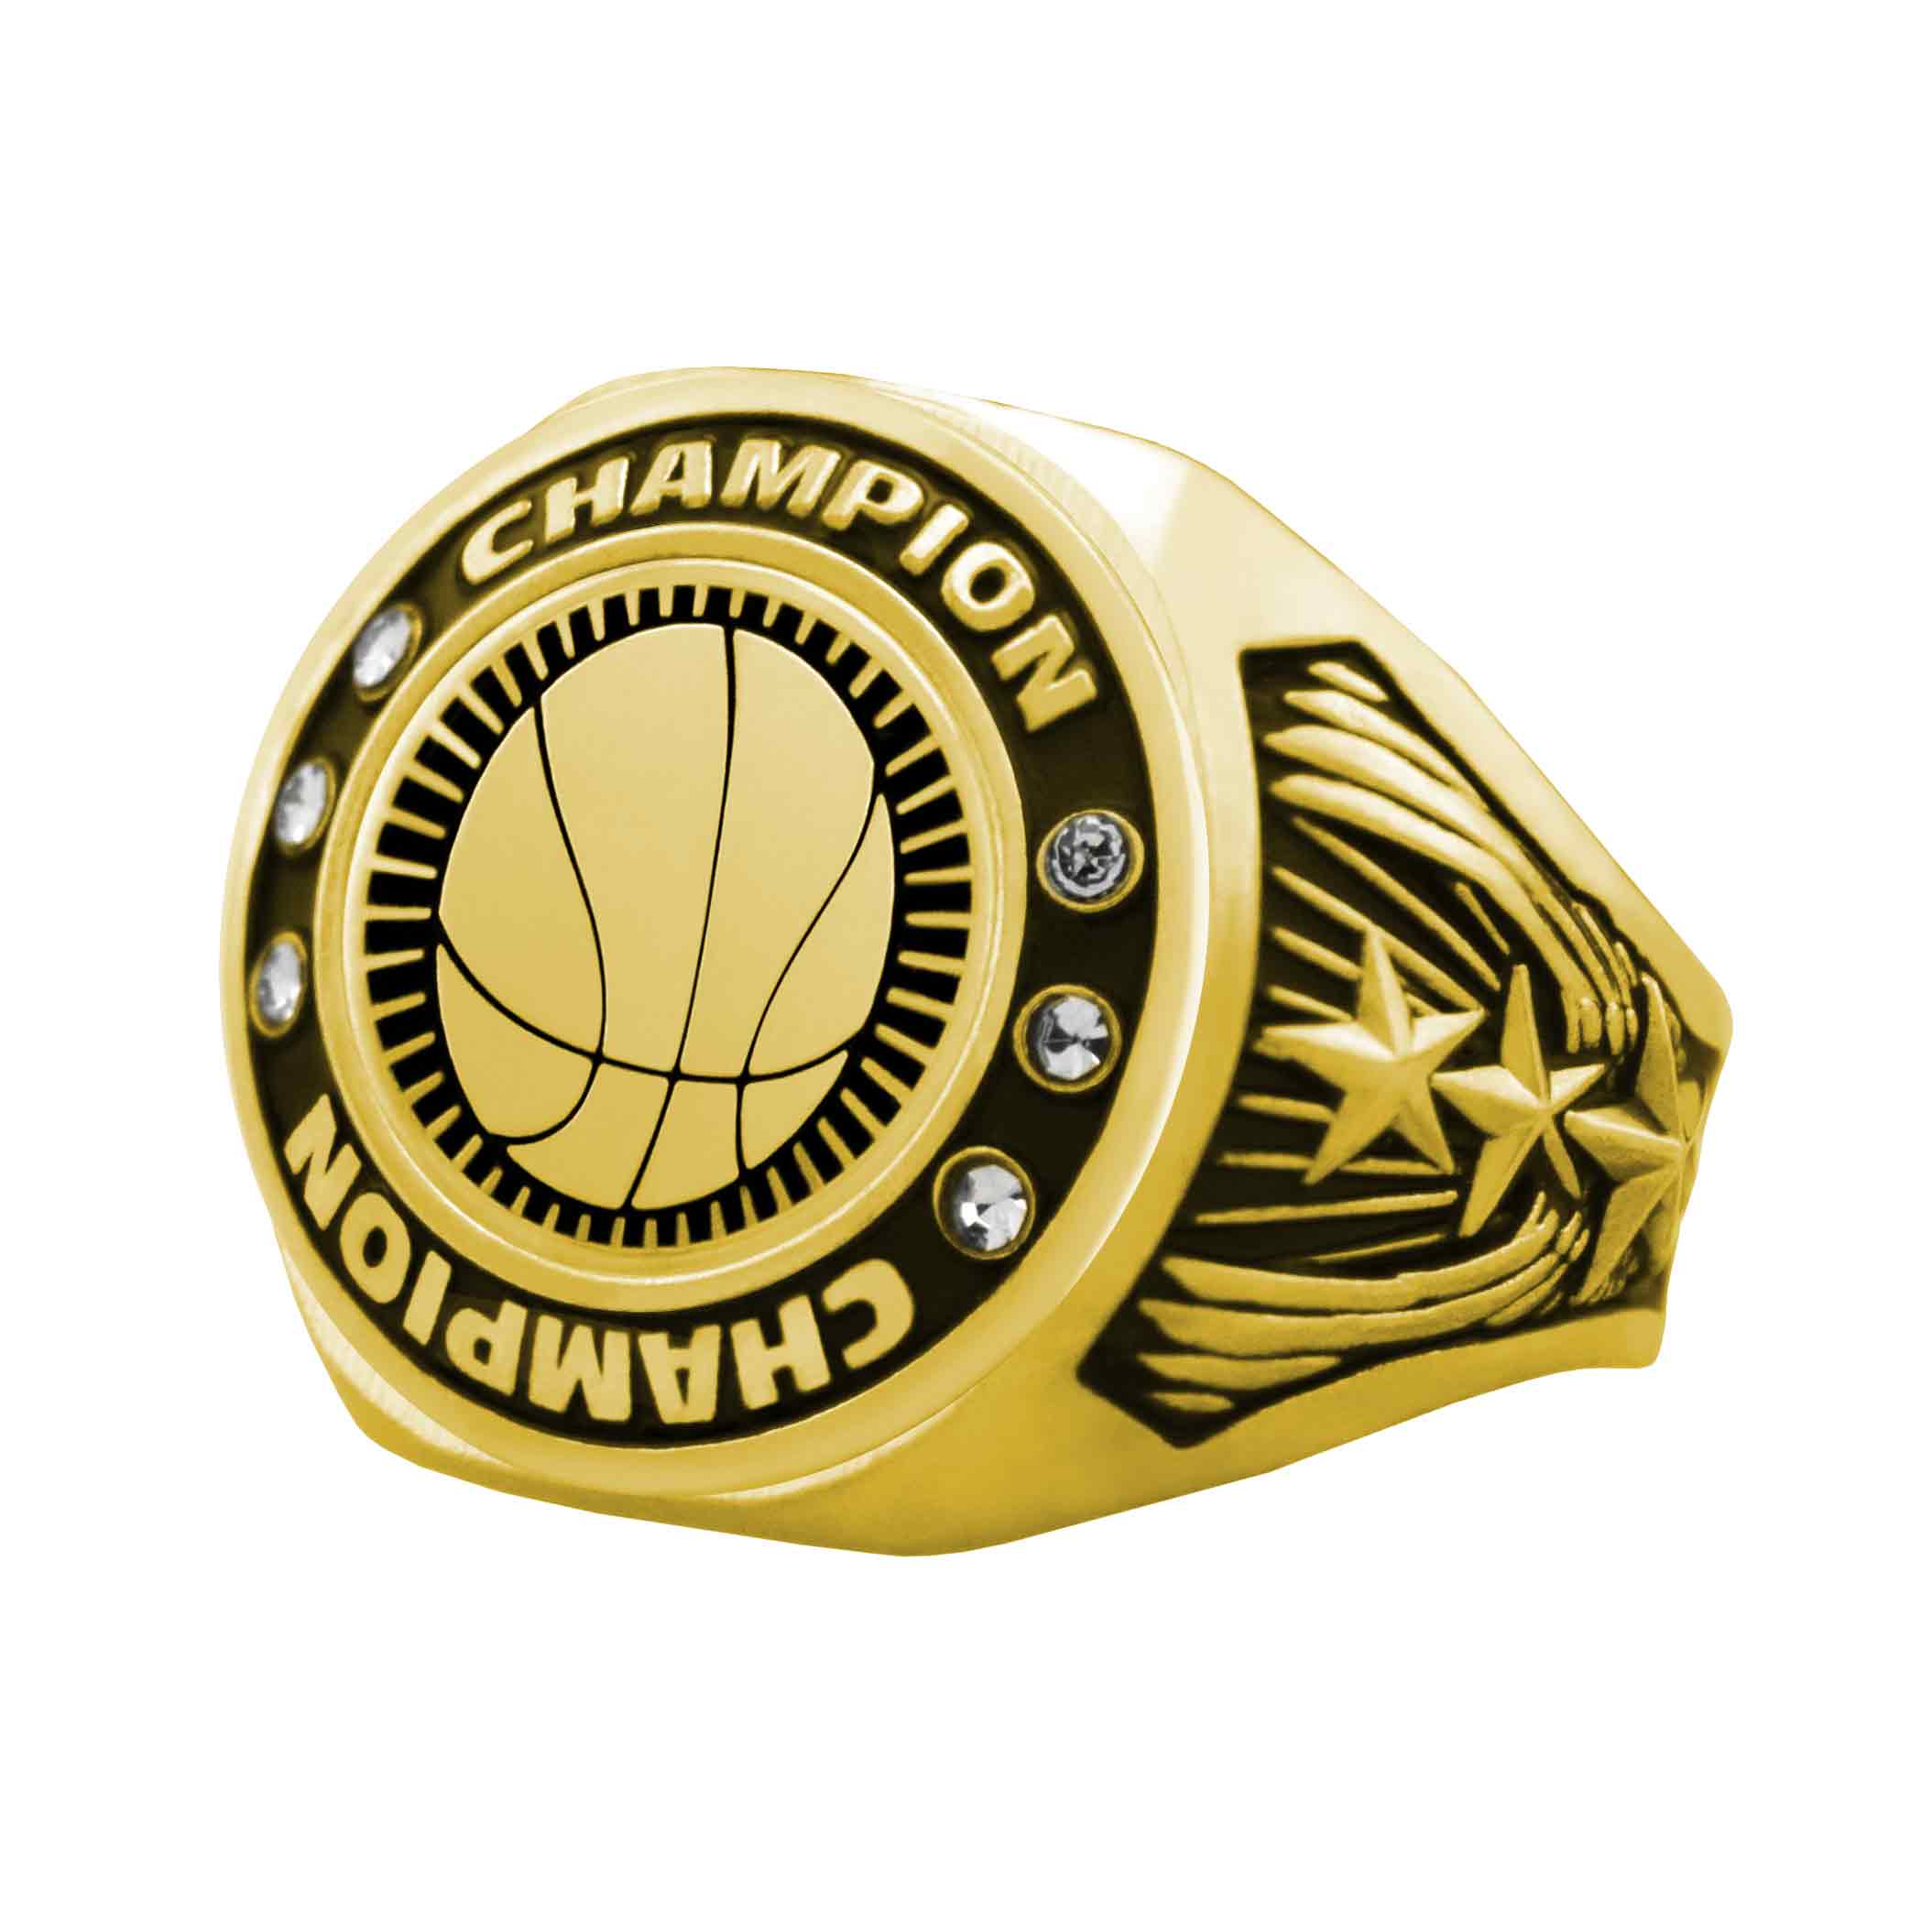 basketball championship rings for sale